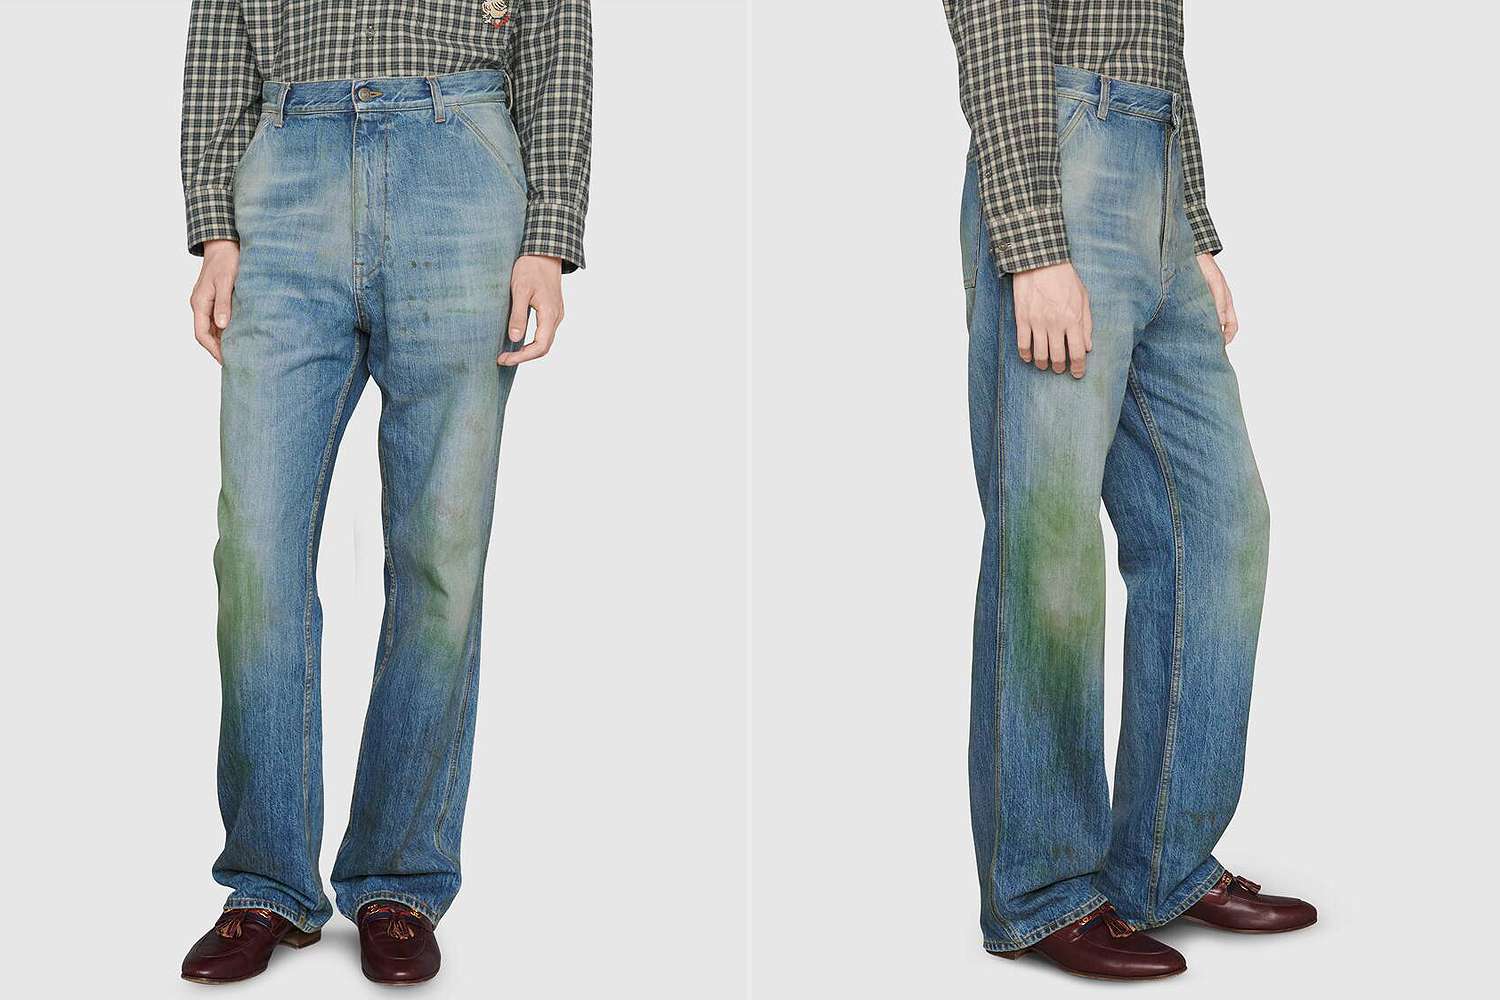 Gucci Debuts 1 200 Jeans Designed With Grass Stains Around The Knees People Com